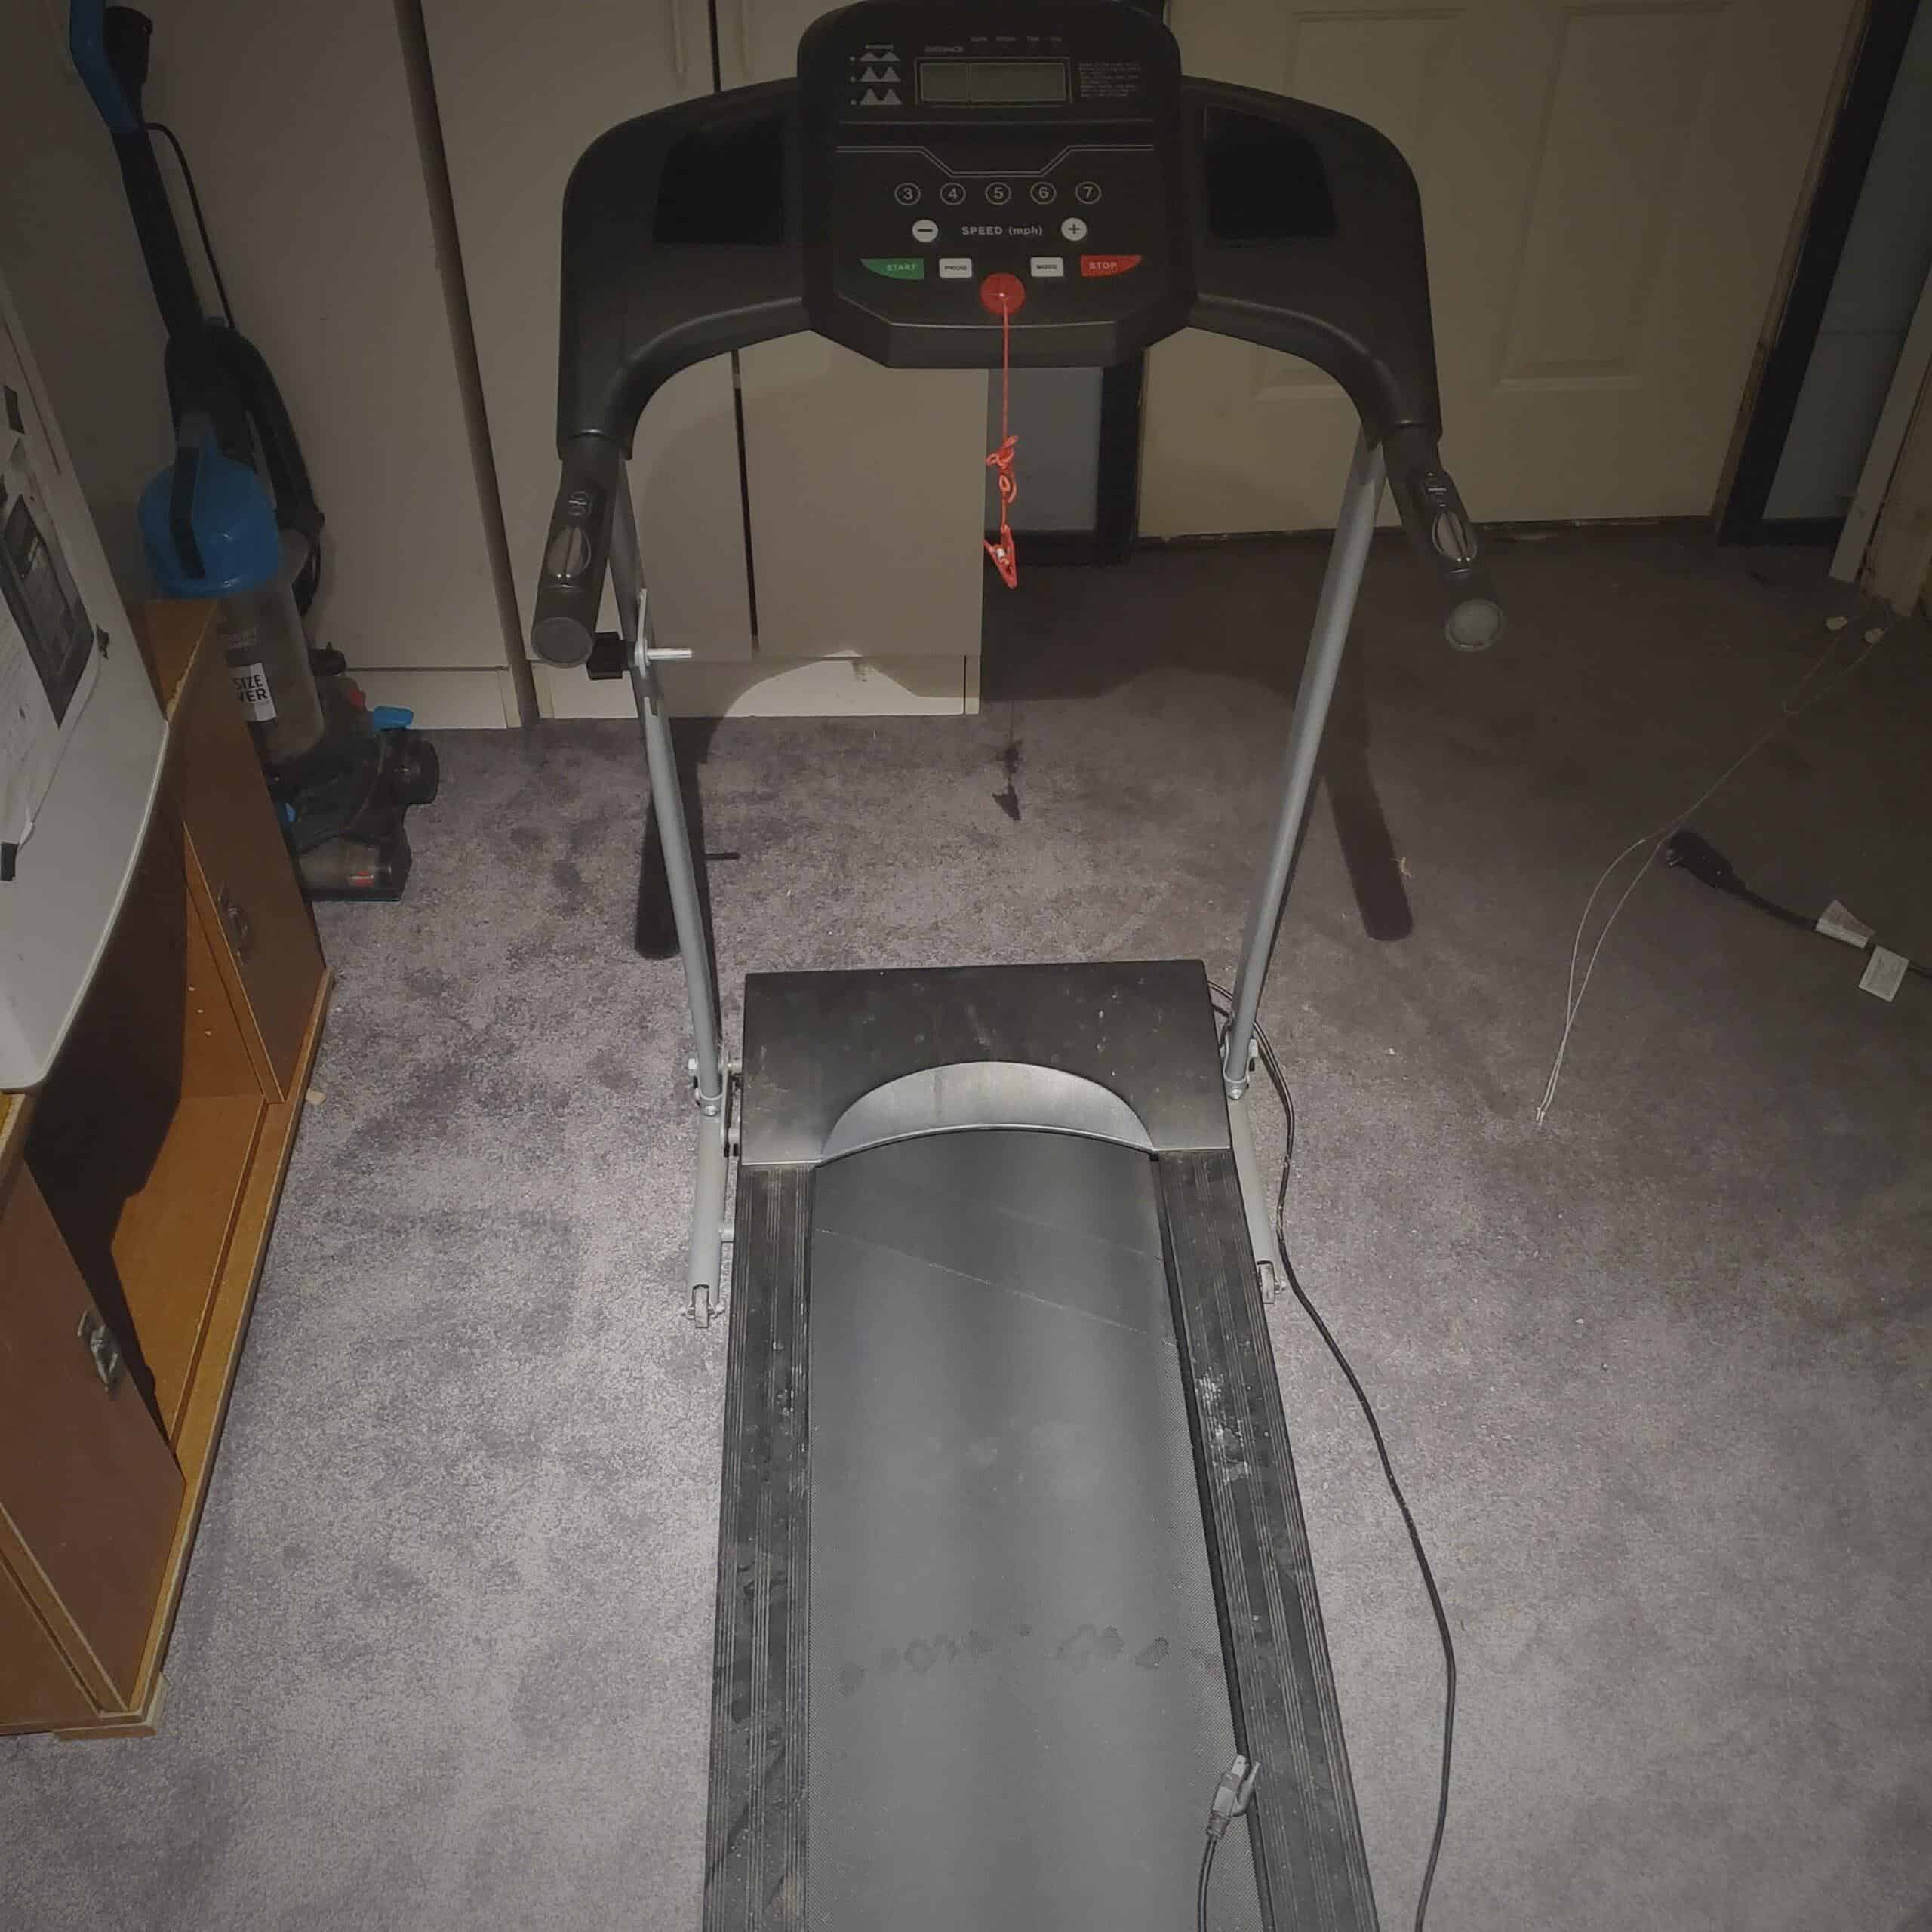 The best affordable treadmill I use in my garage for cardio